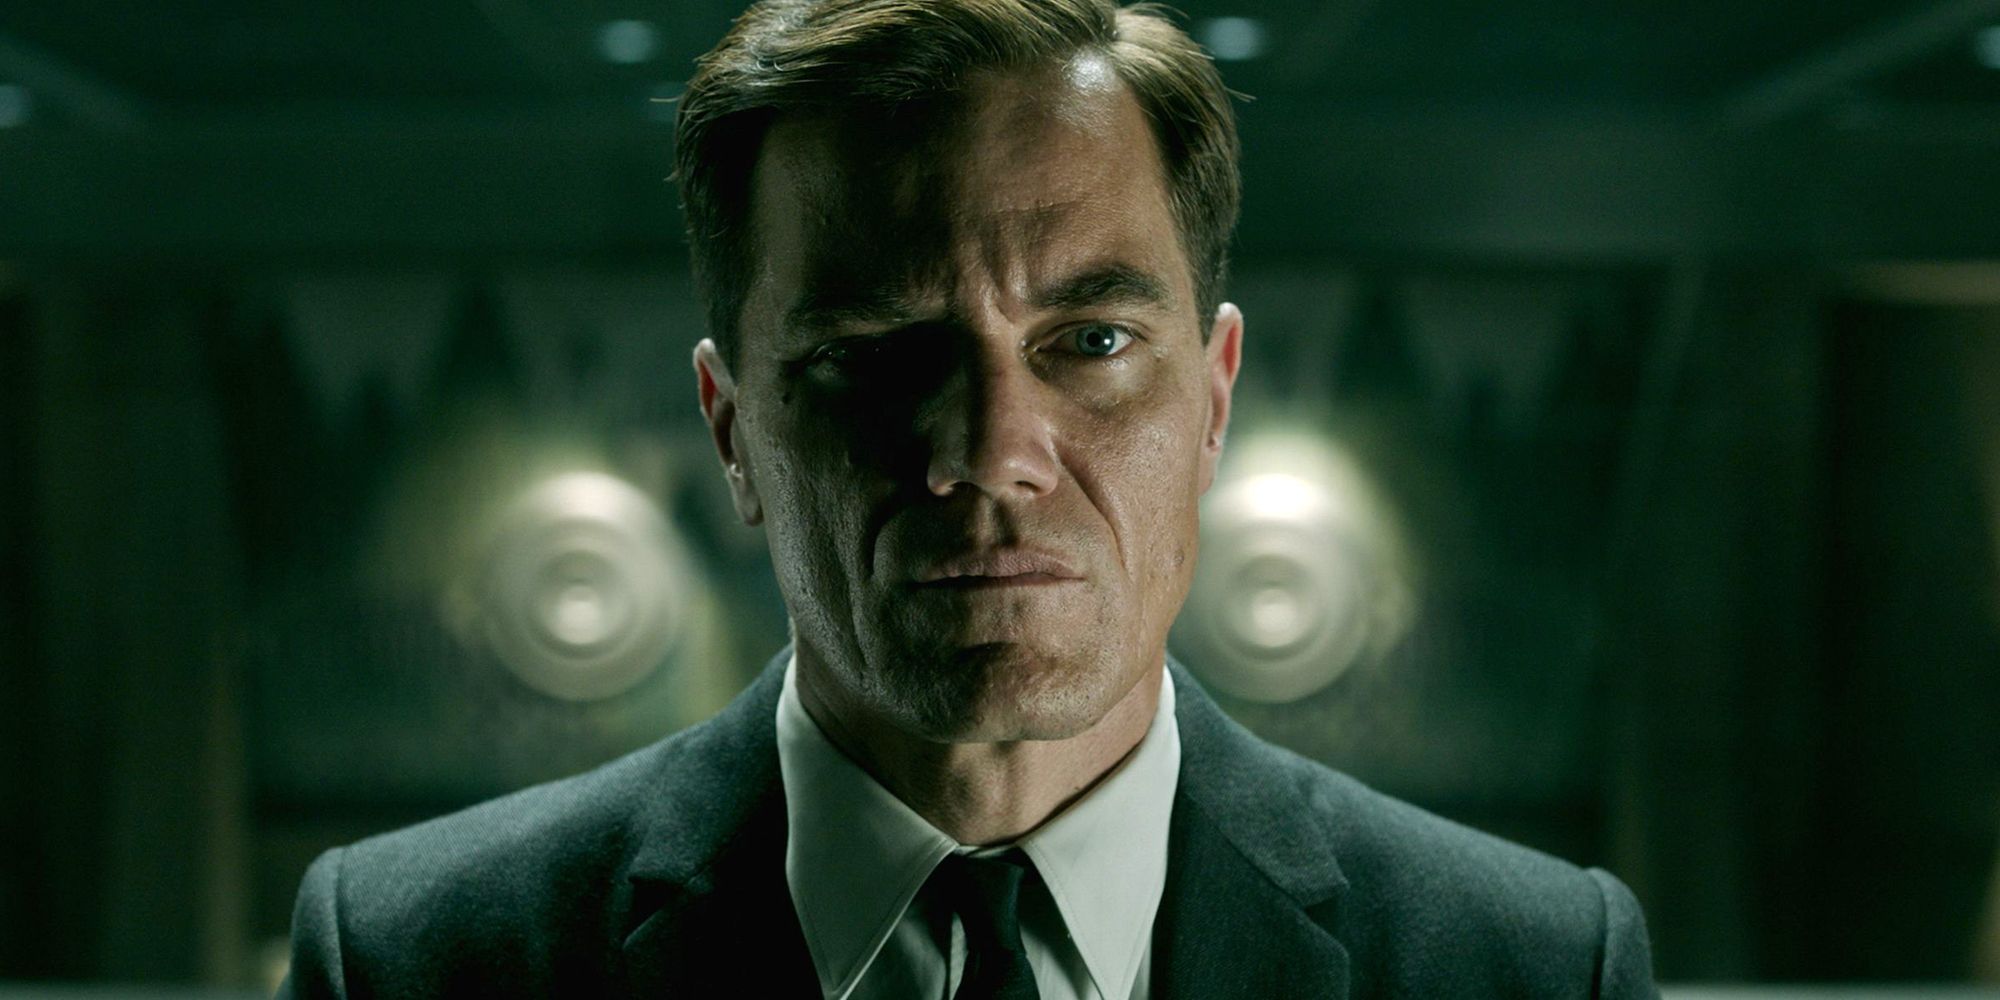 Michael Shannon stares ahead in The Shape of Water